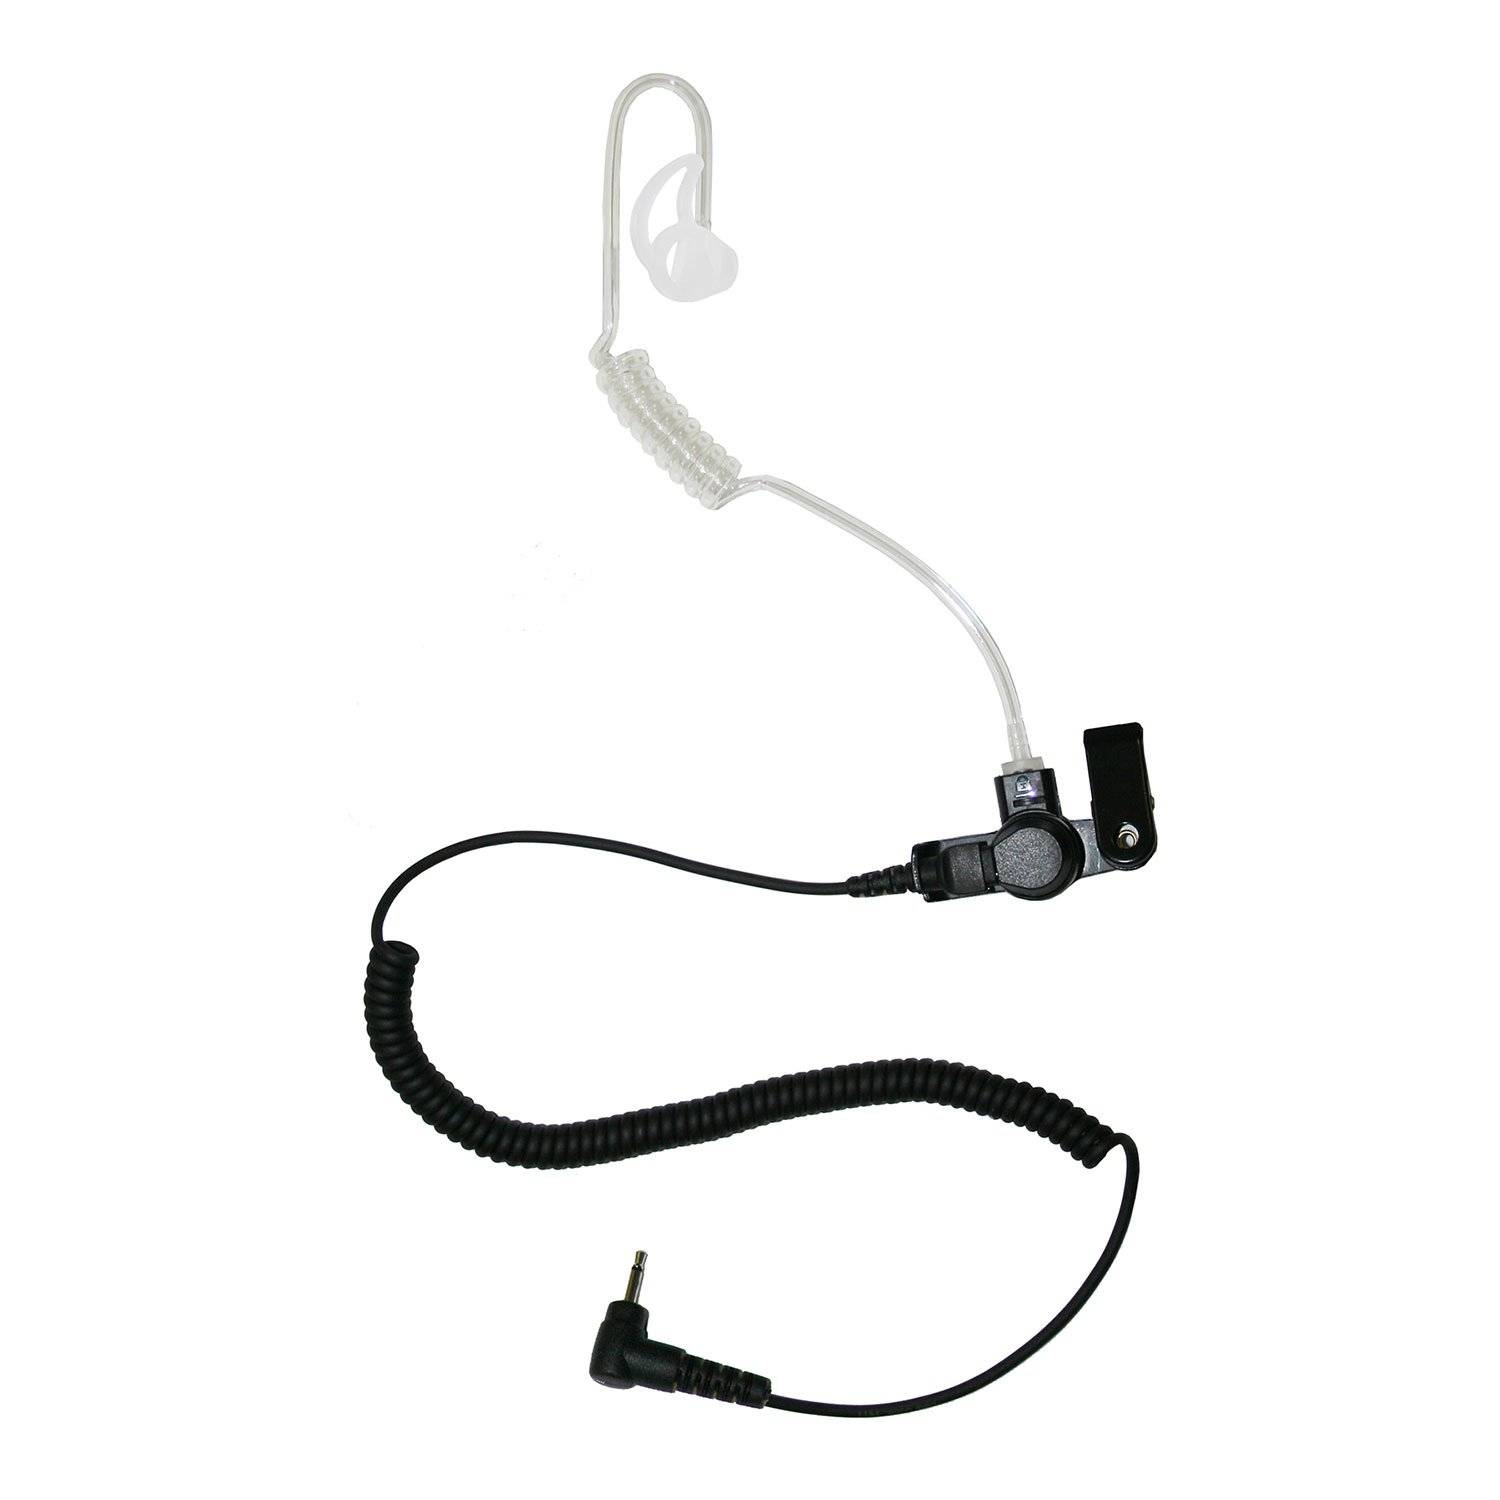 Ear Phone Connection Fox Listen-Only Earpiece with 2.5mm Con